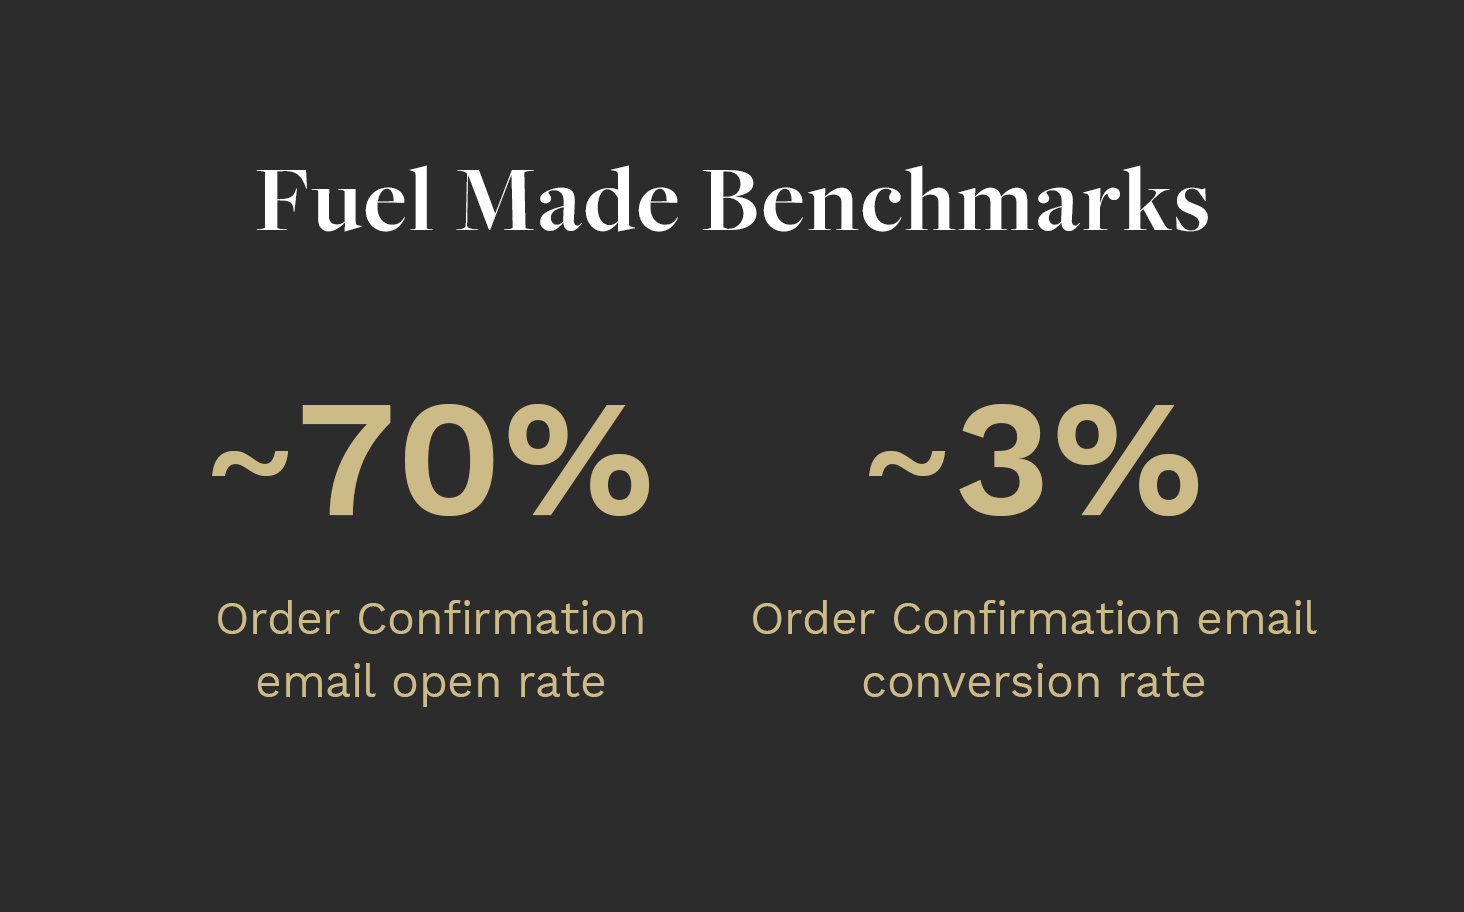 Fuel Made Benchmarks